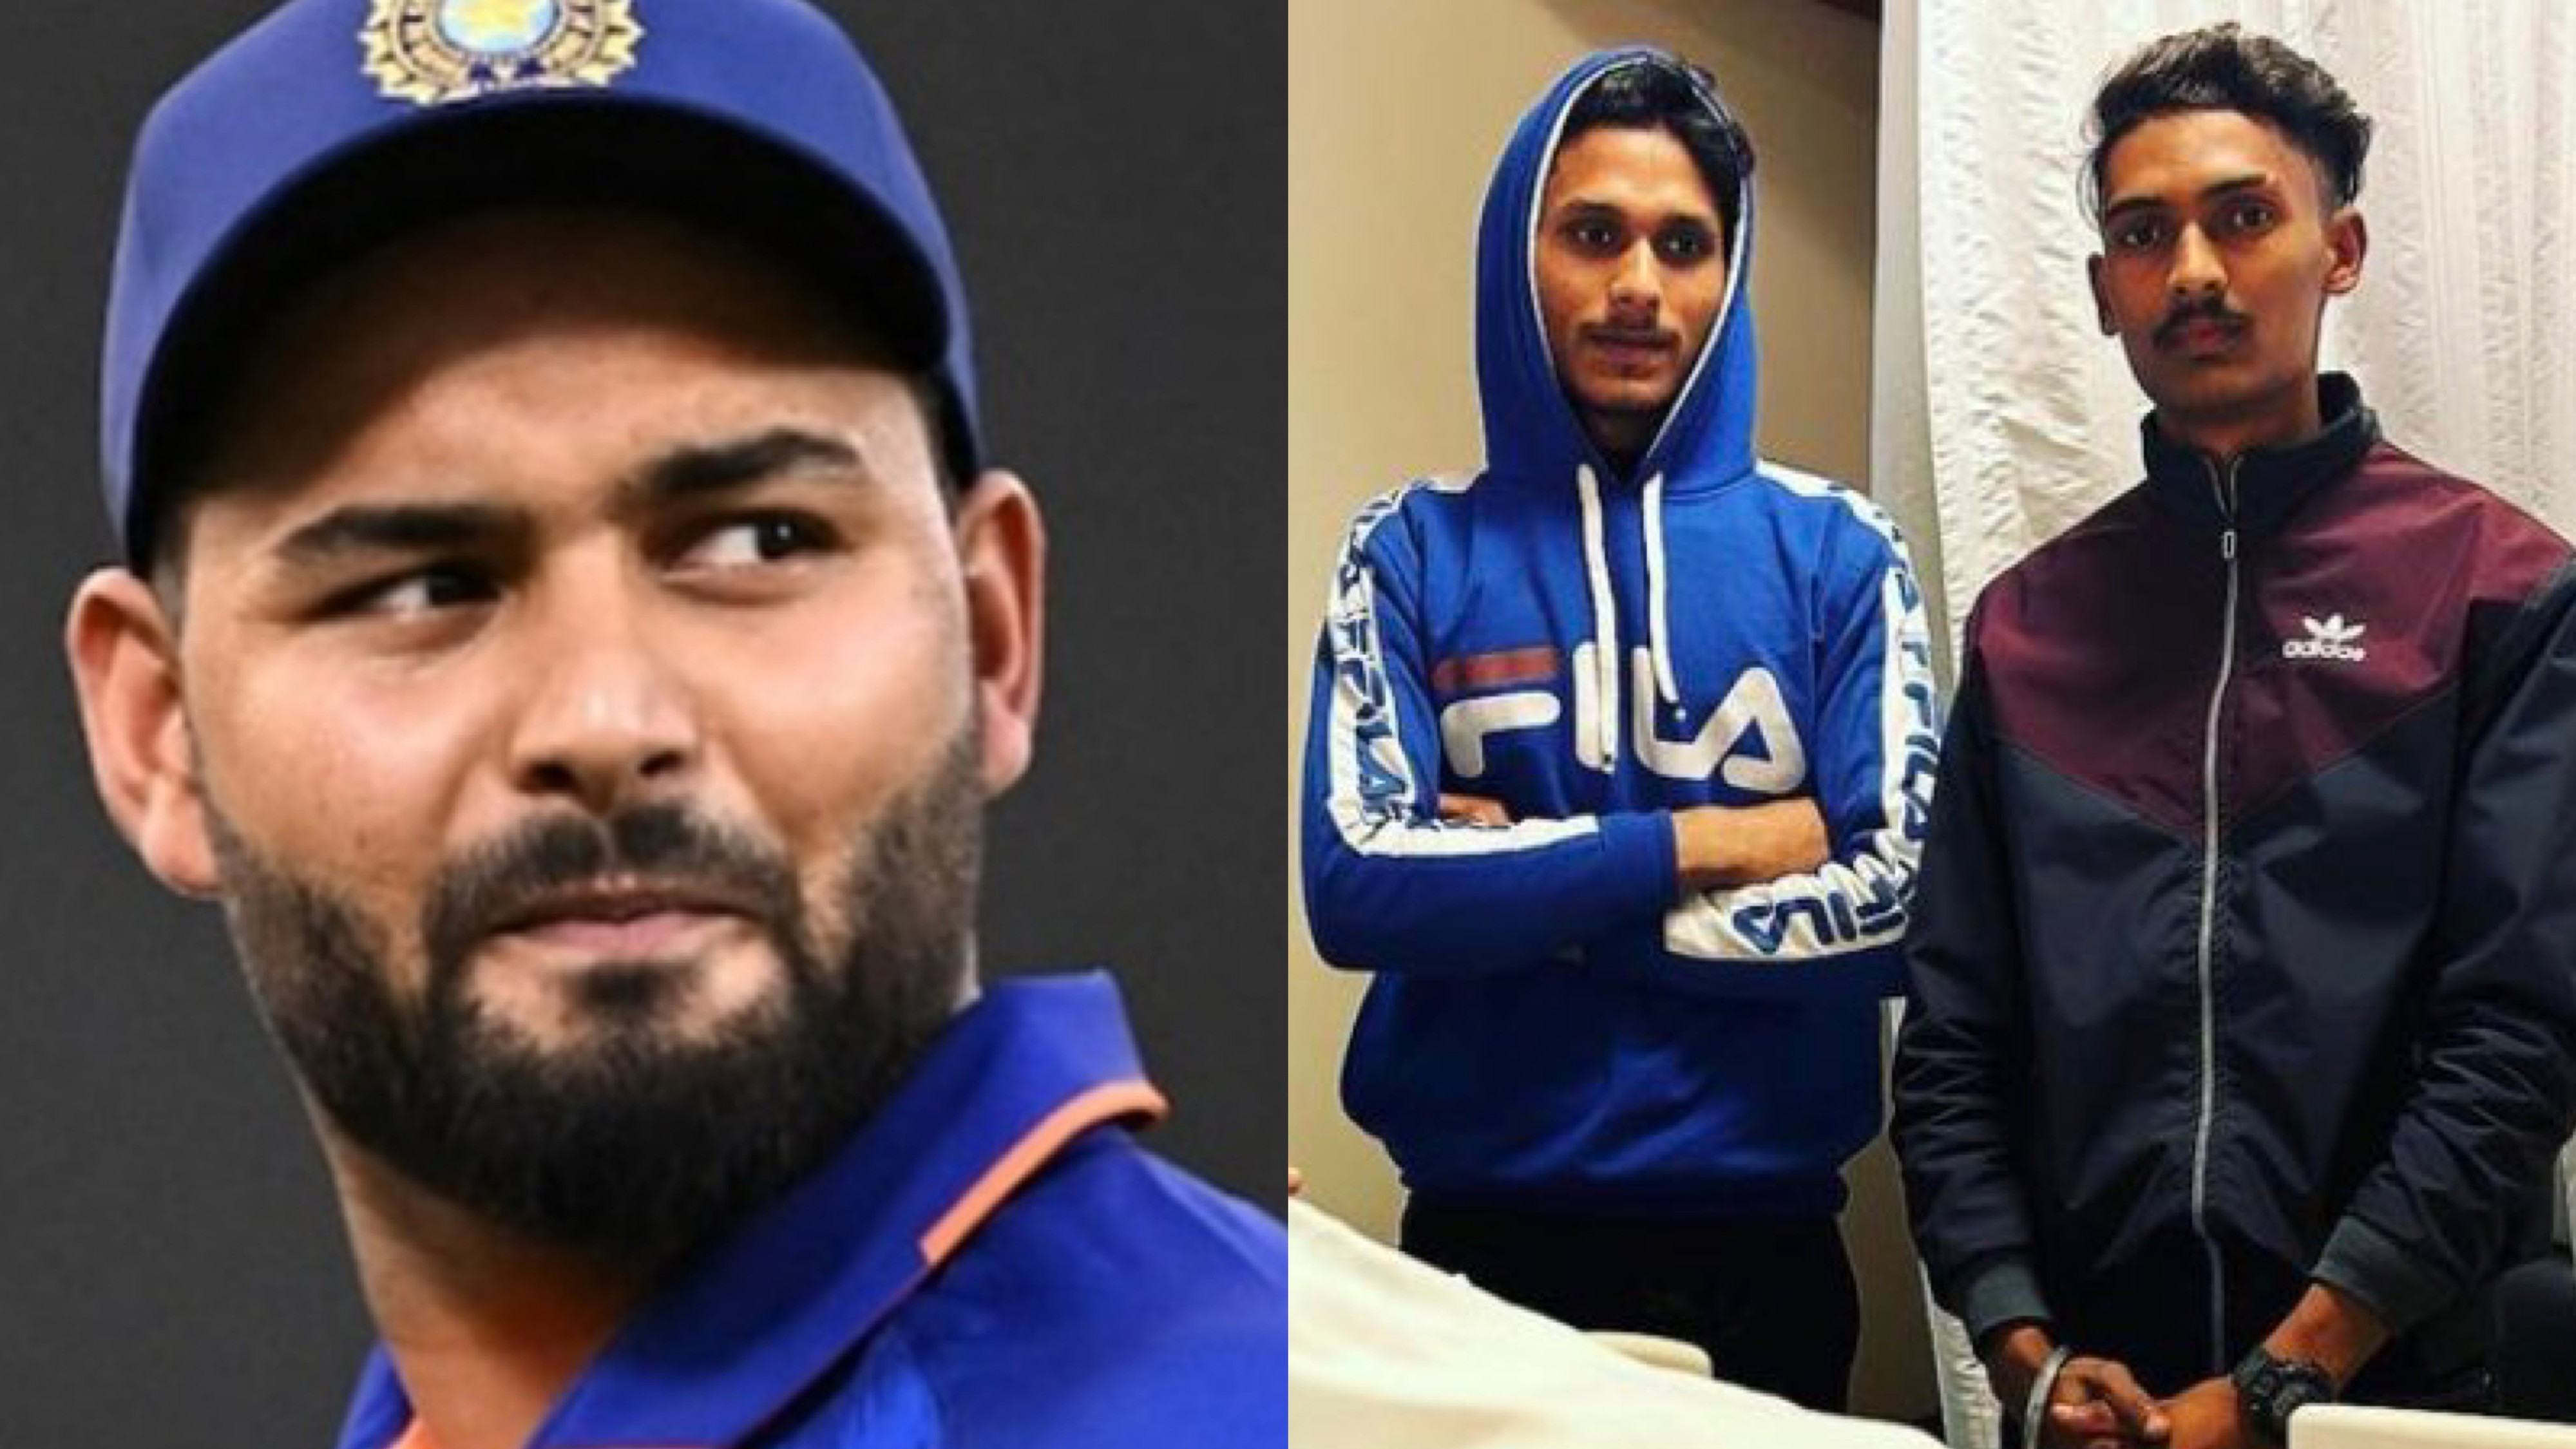 “I'll be forever grateful and indebted” - Rishabh Pant thanks his ‘heroes’ Rajat Kumar and Nishu Kumar